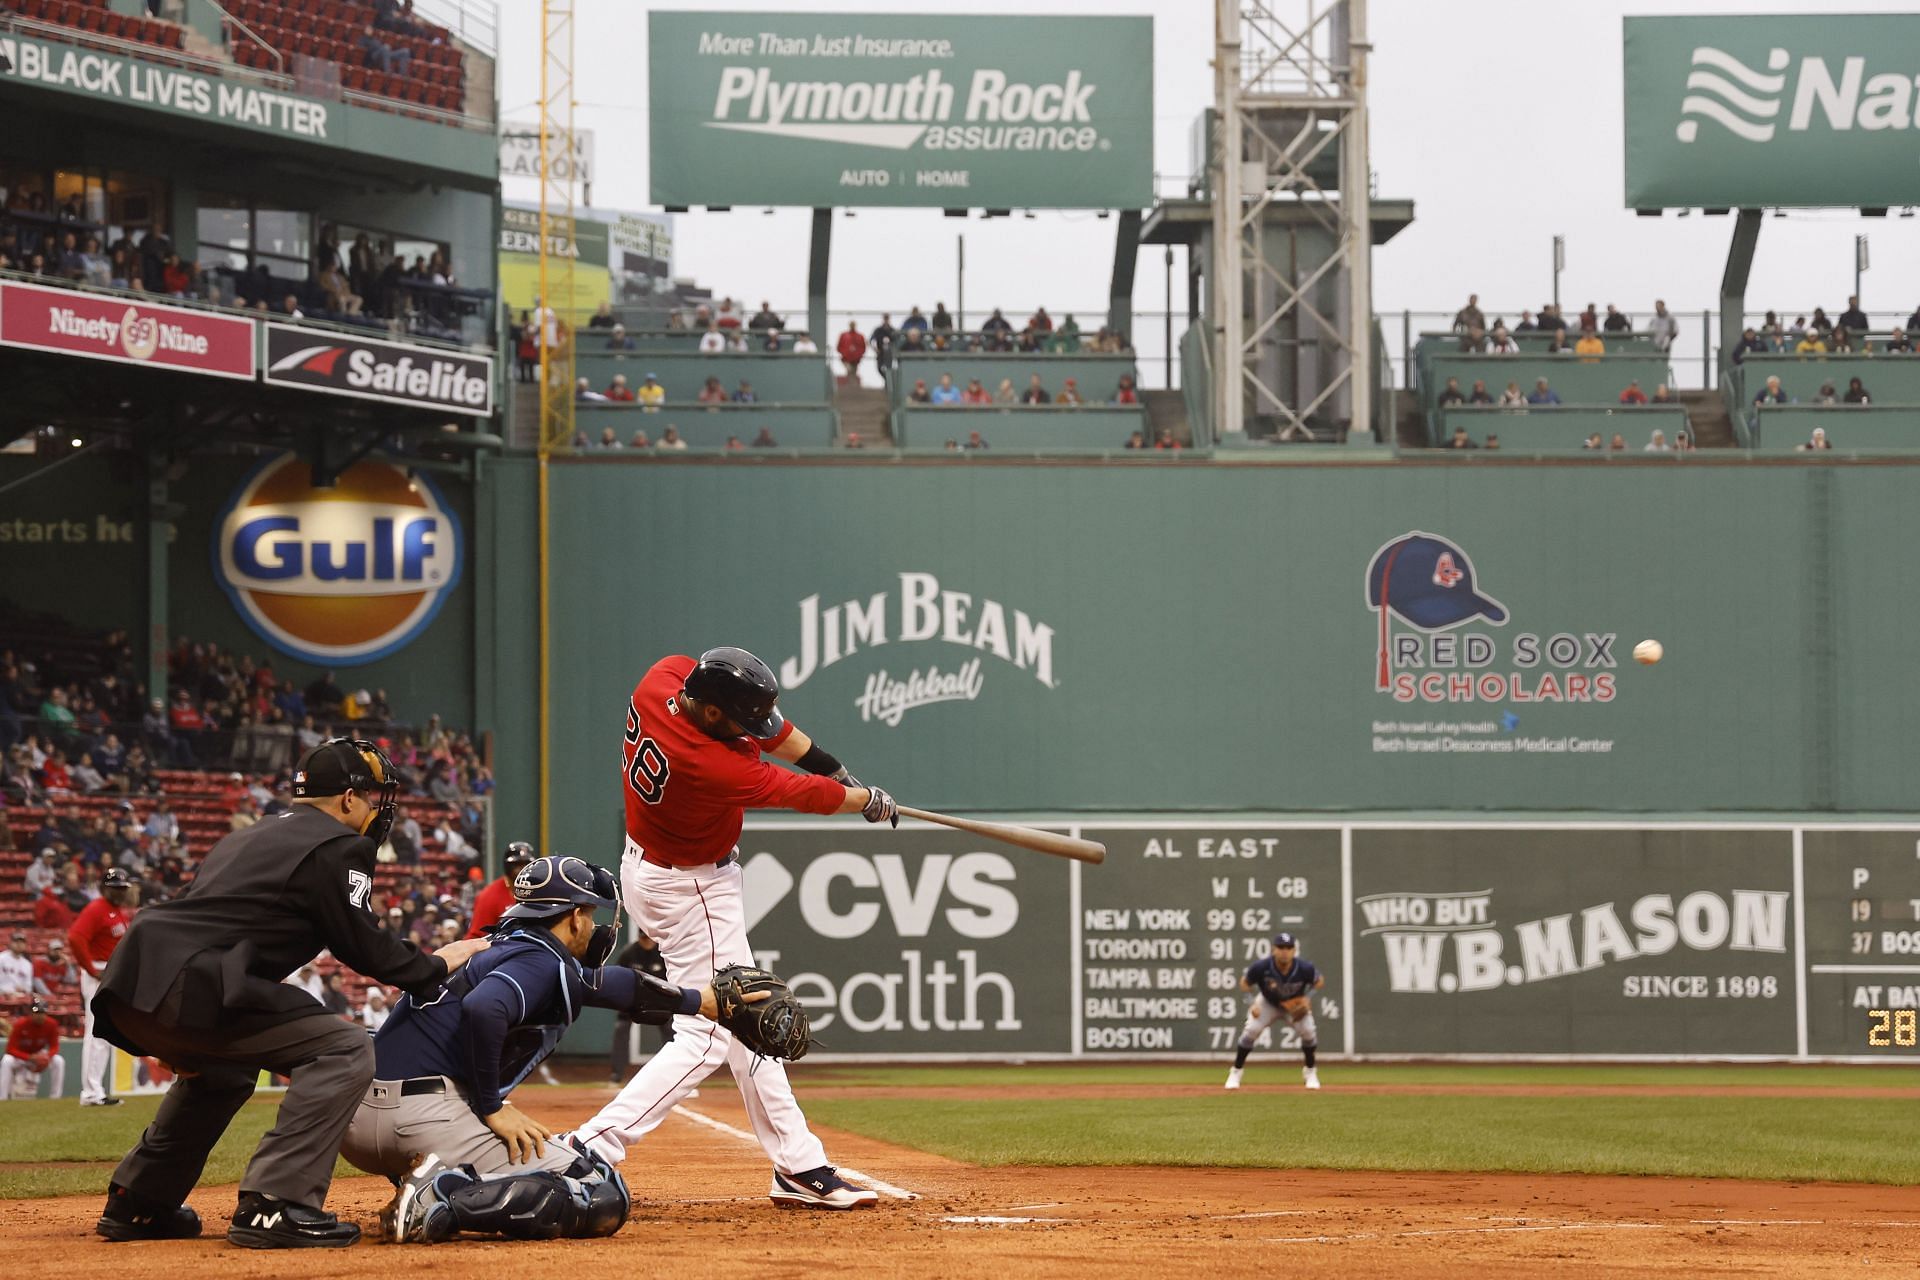 J.D. Martinez of the Boston Red Sox connects on a home run against the Tampa Bay Rays at Fenway Park